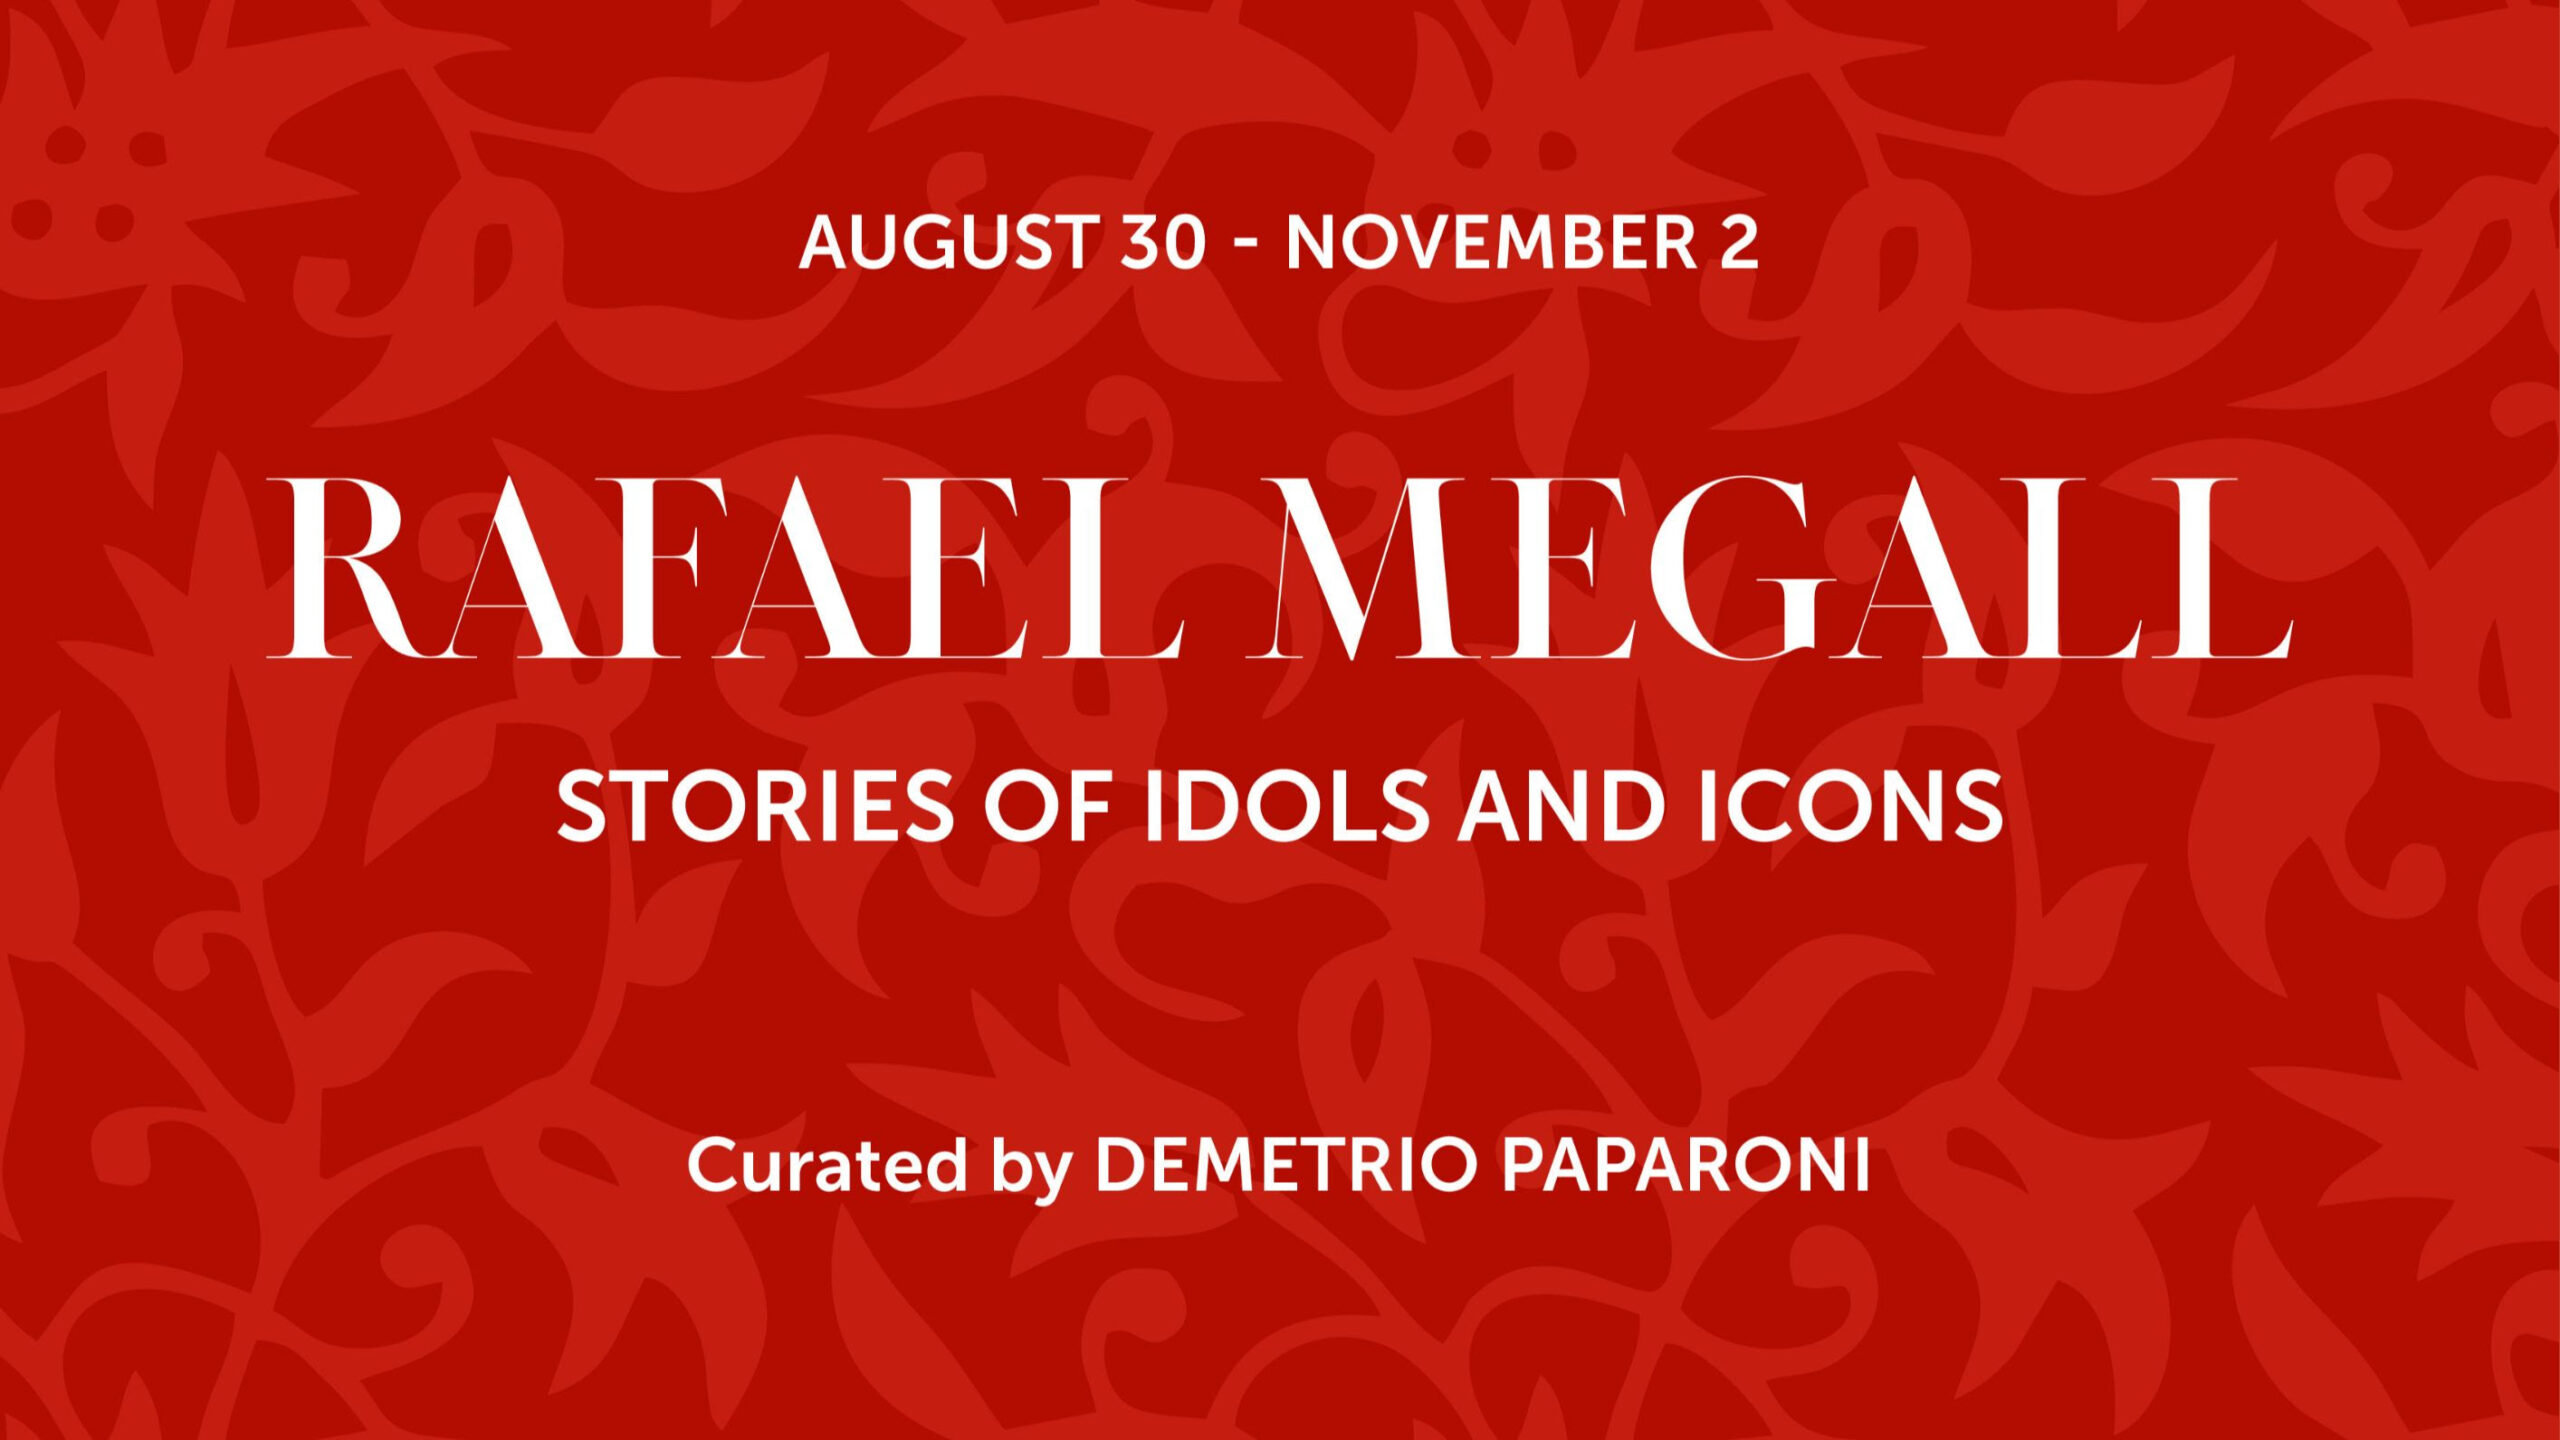 Rafael Megall - Stories of Idols and Icons